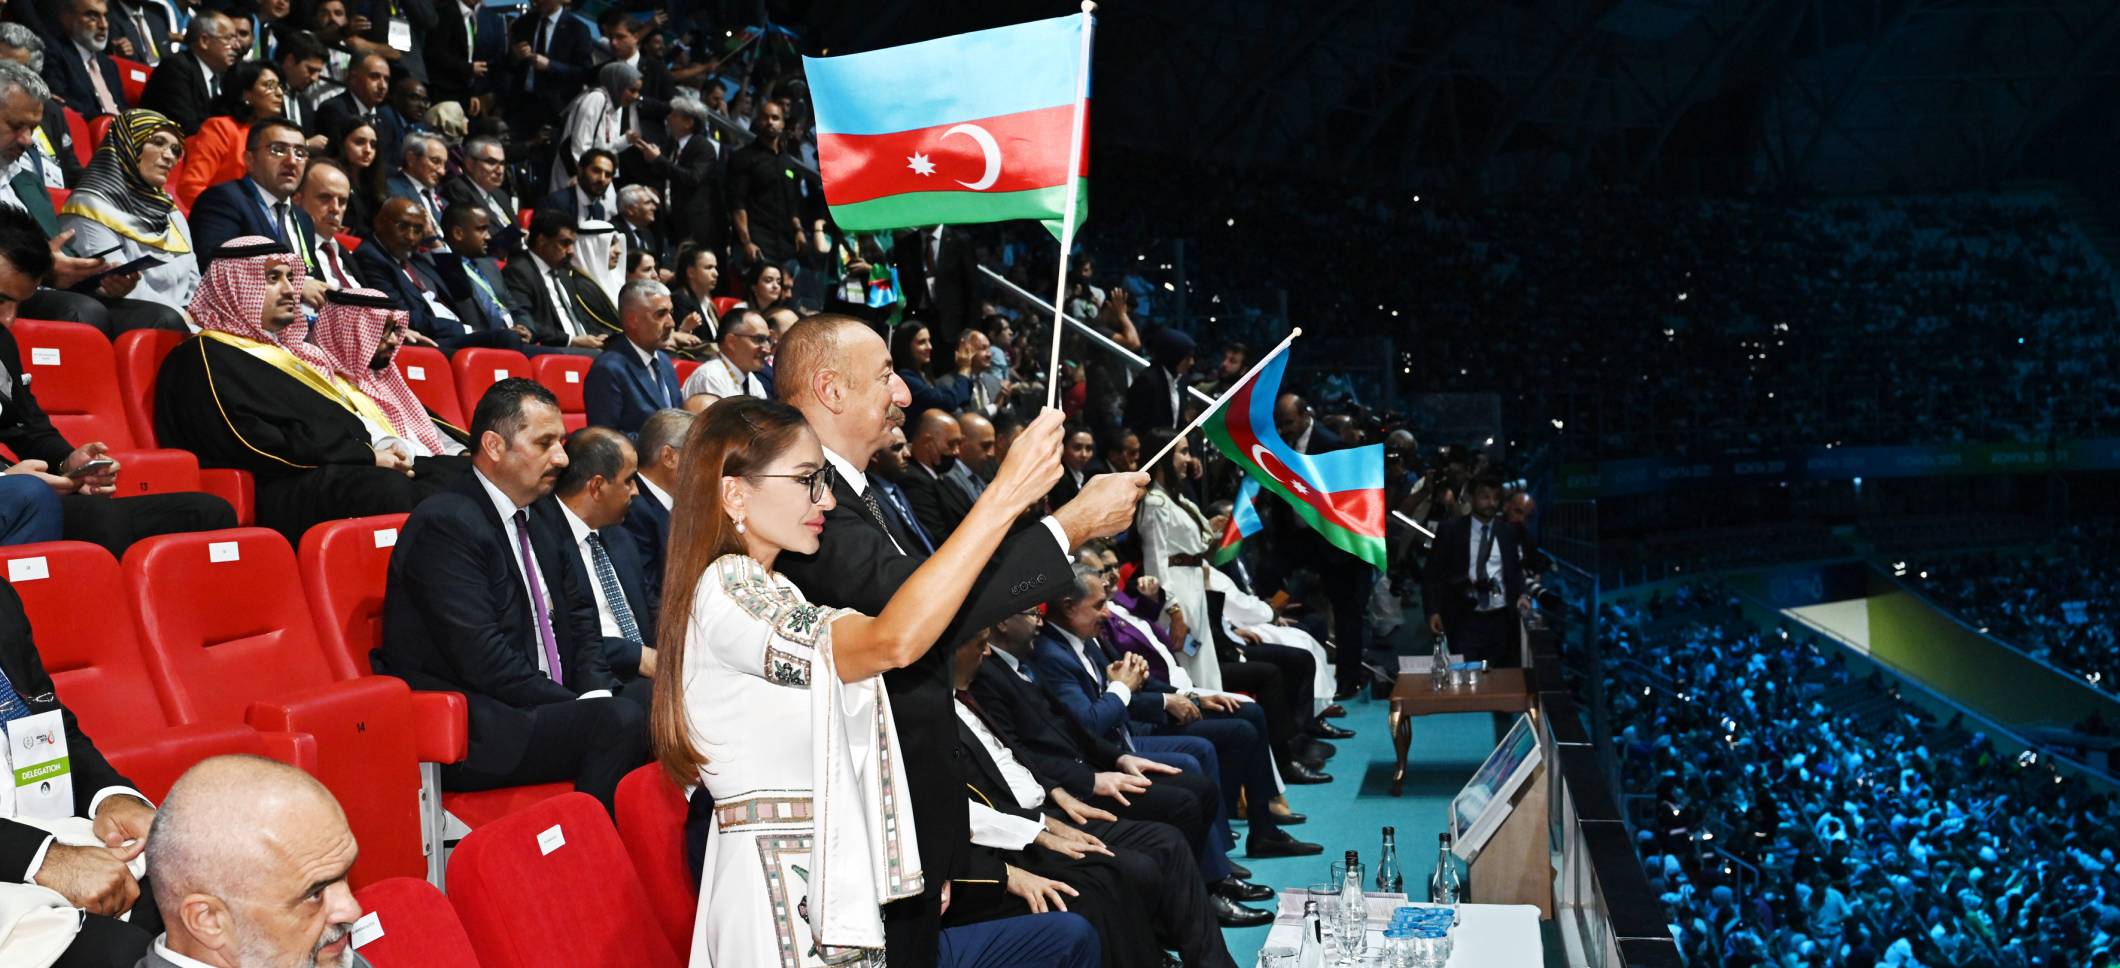 Konya hosted solemn opening ceremony of 5th Islamic Solidarity Games President of Azerbaijan Ilham Aliyev and First Lady Mehriban Aliyeva attended the ceremony